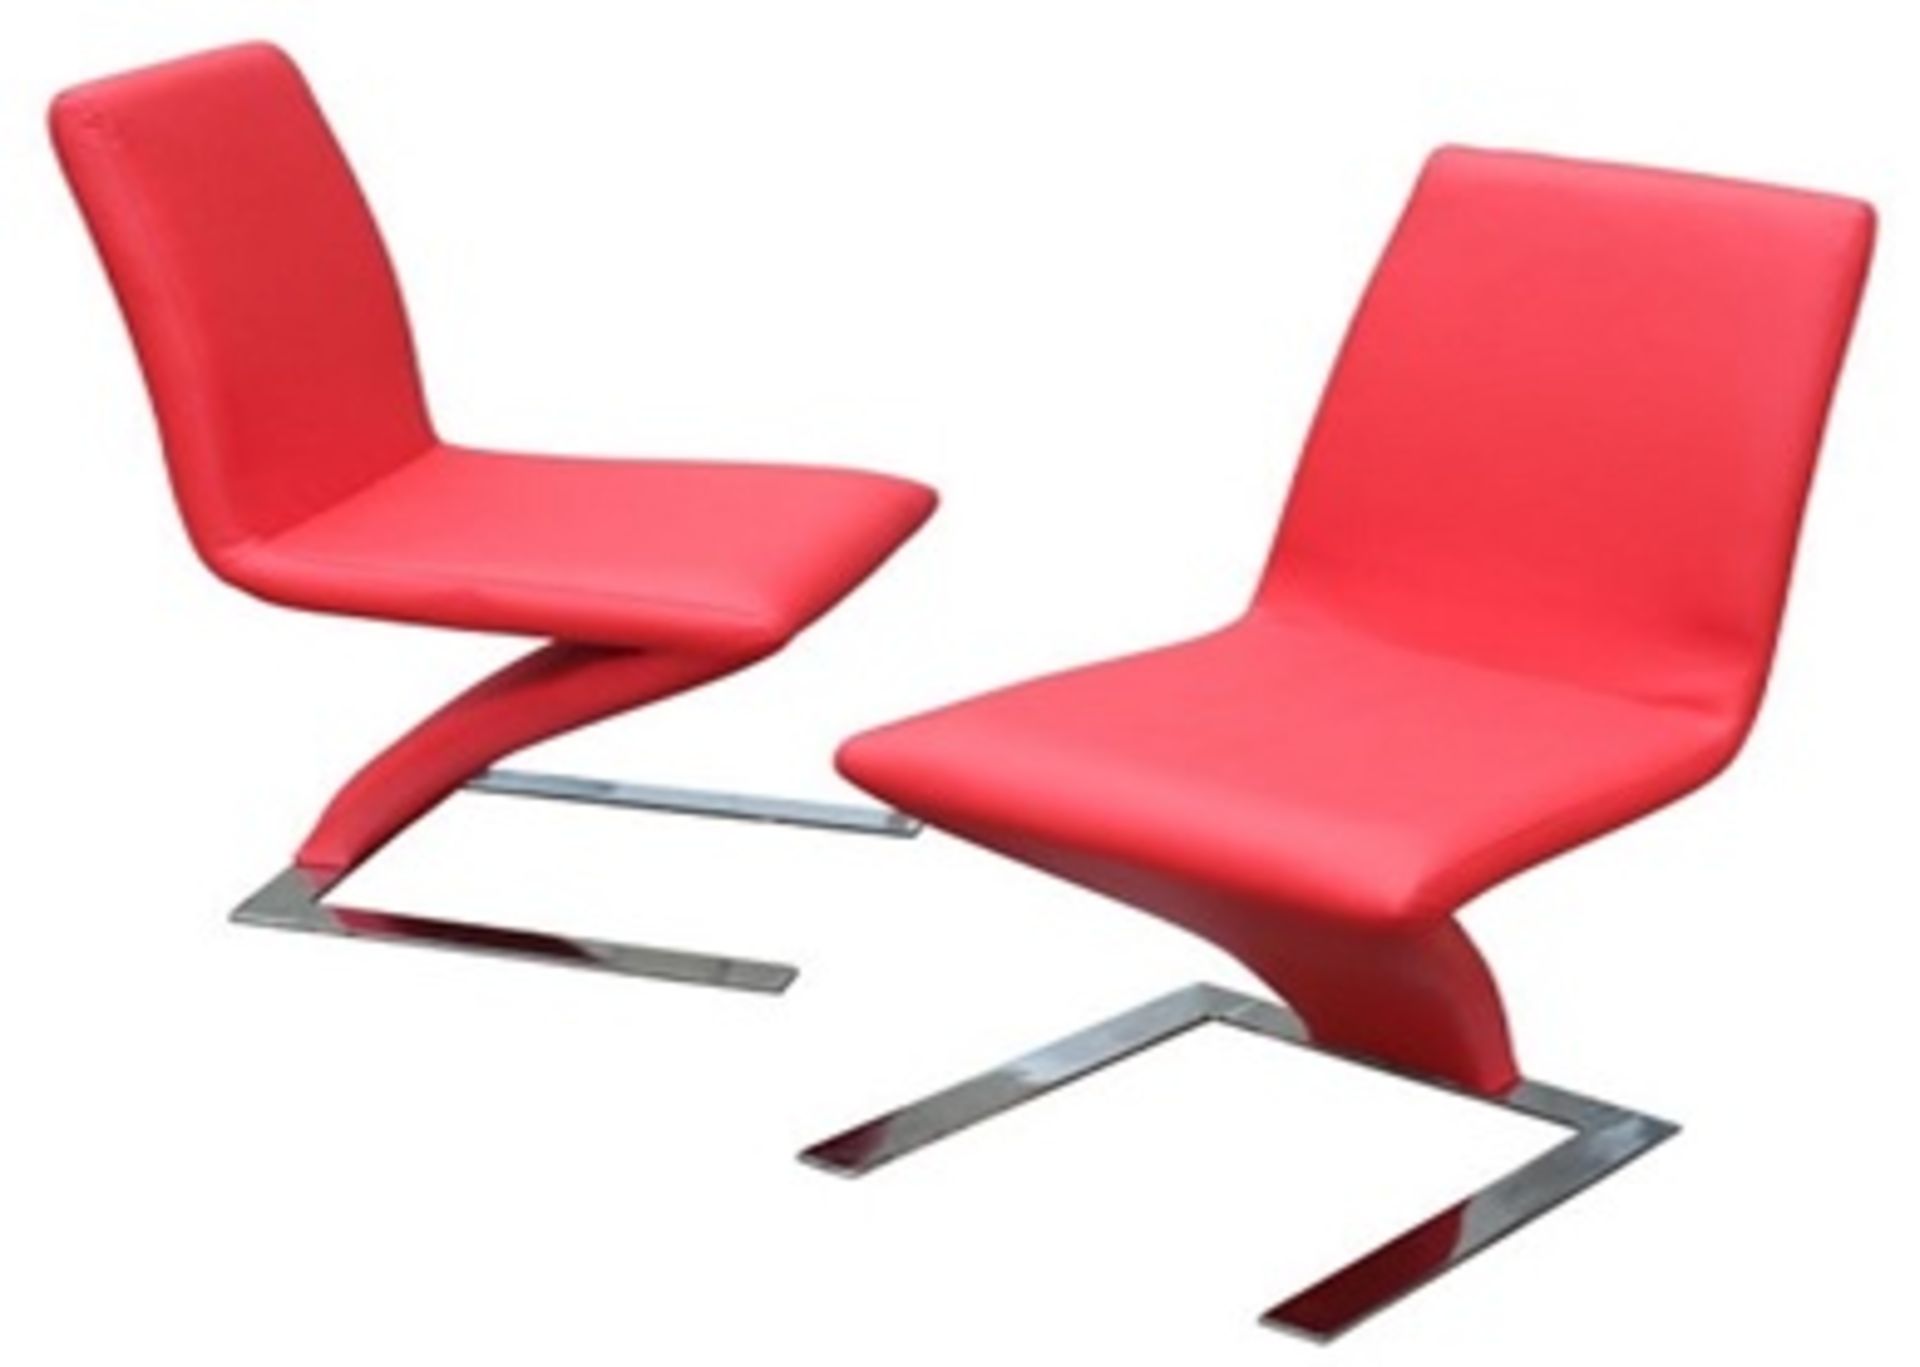 2 x Red Faux Leather Dining Chairs - Ref DCH105/RED (Brand New & Boxed)